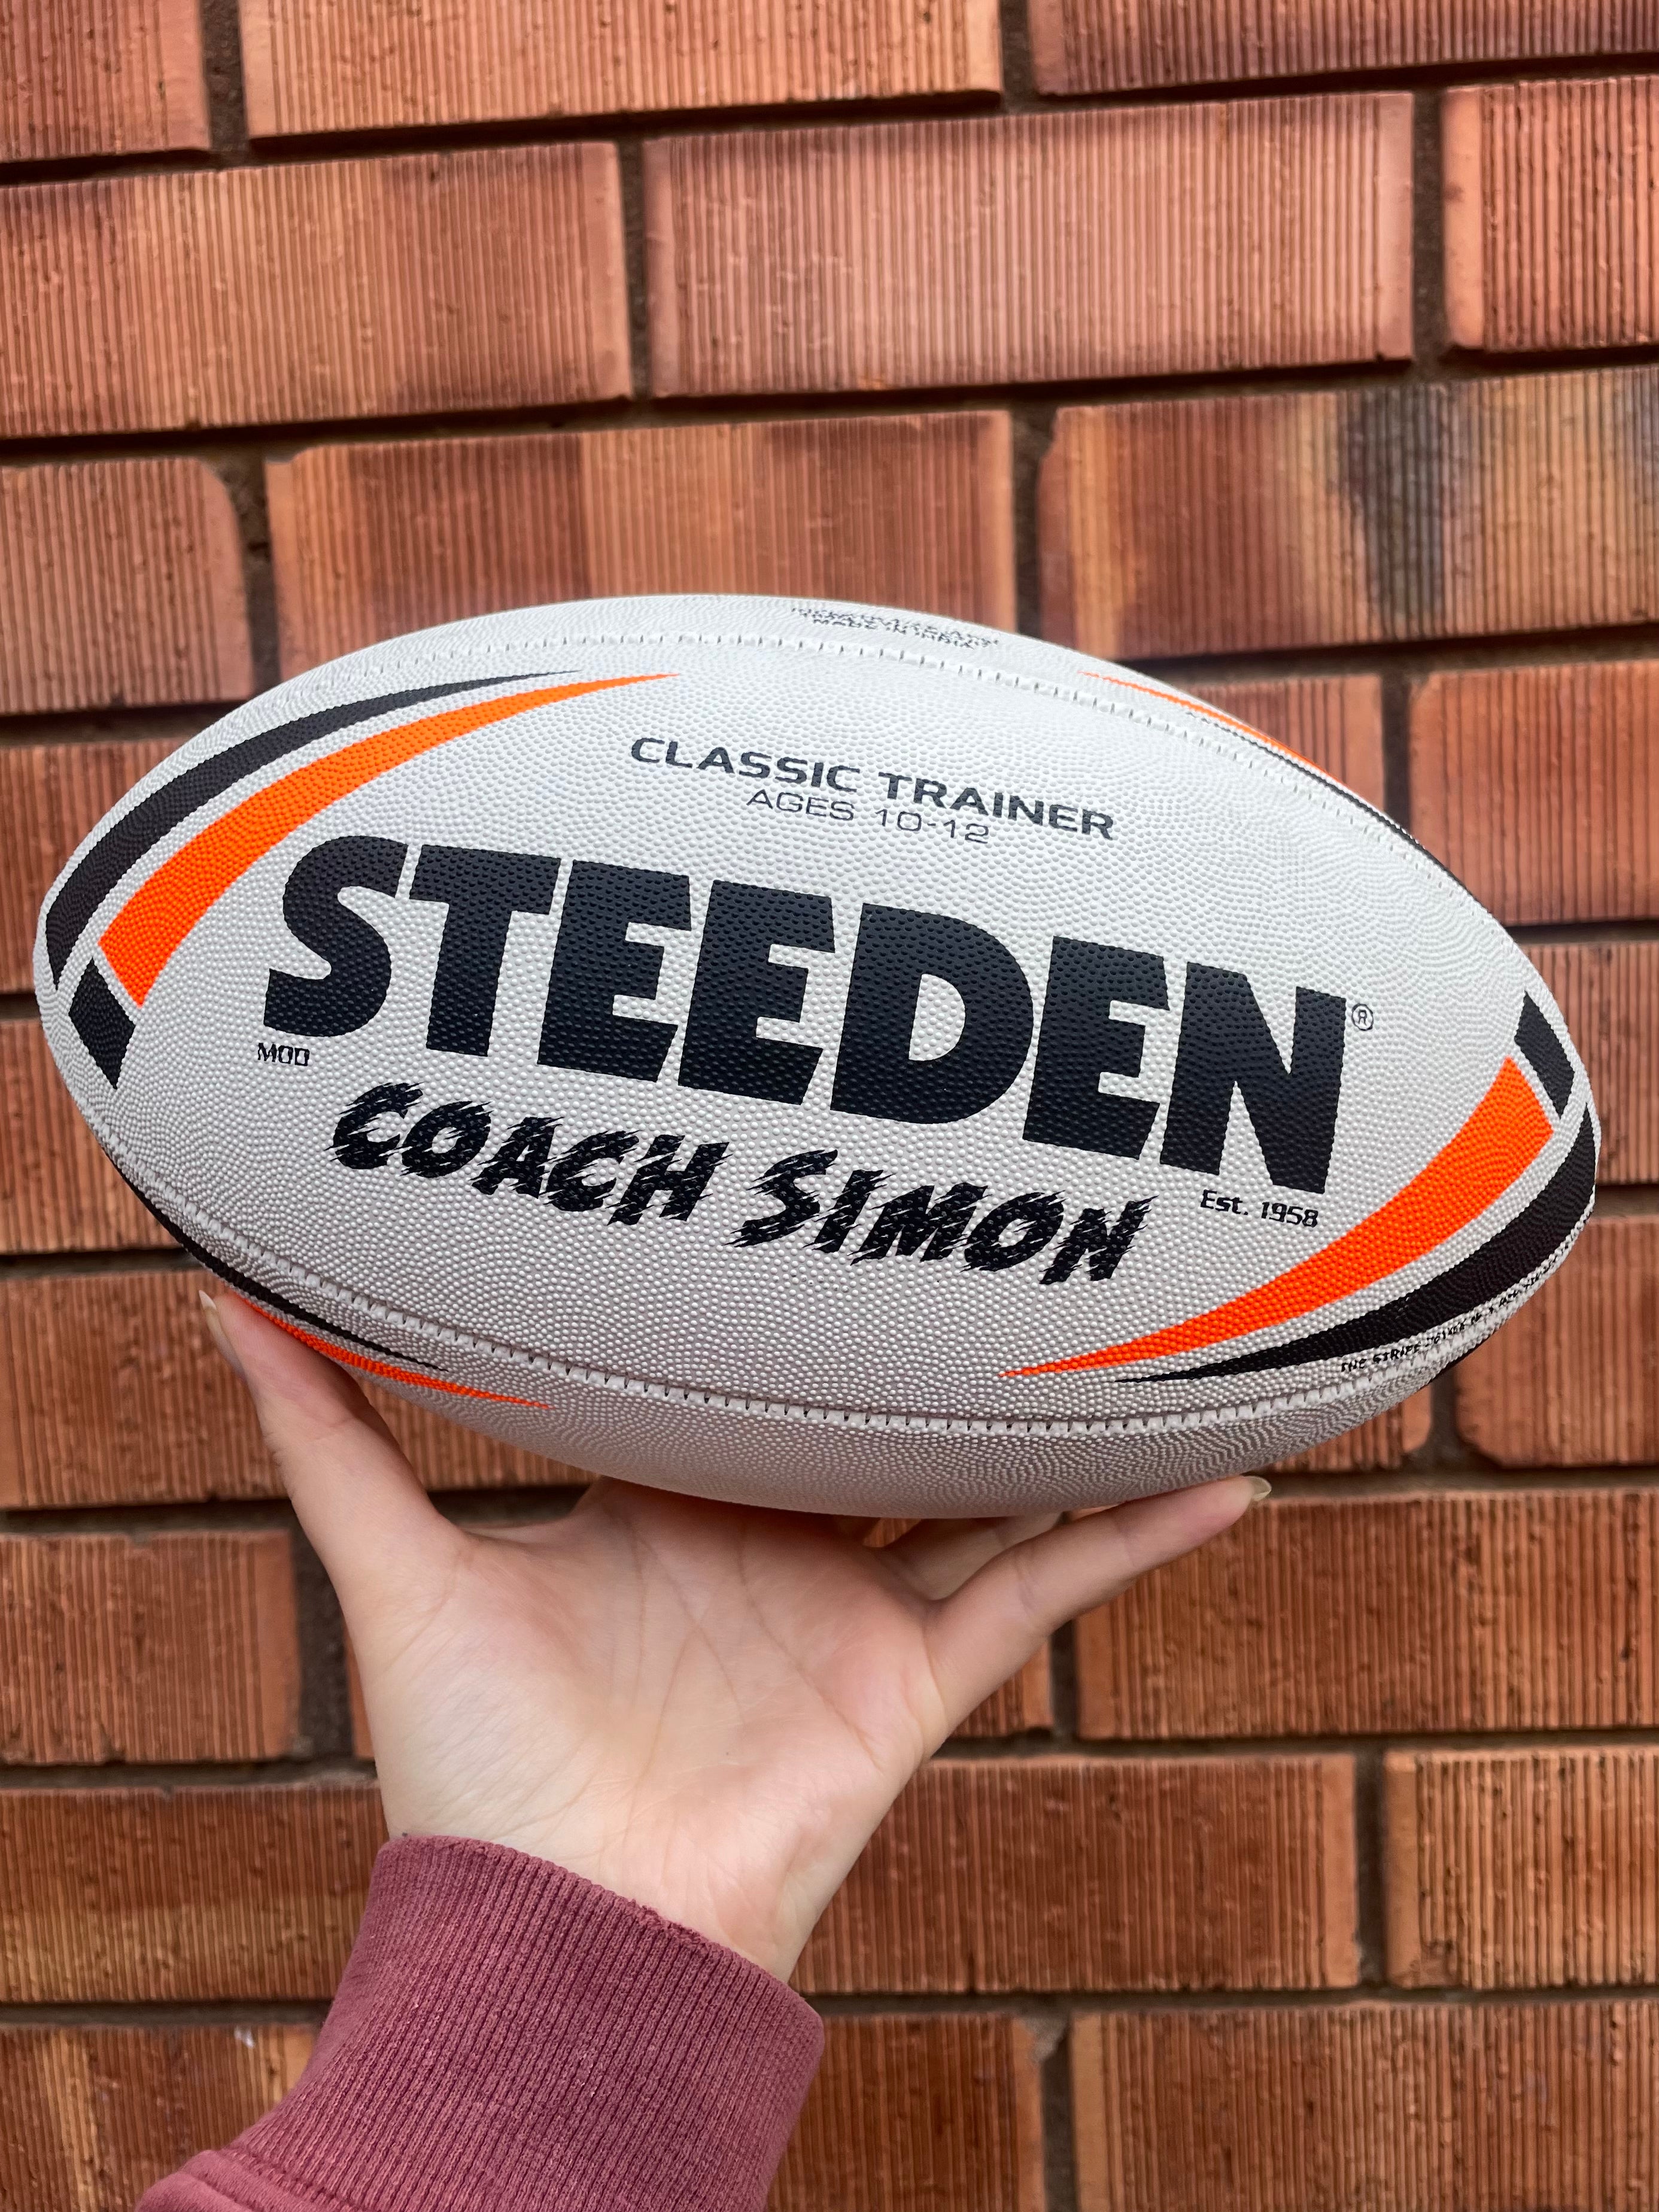 Personalised White/Orange Steeden Rugby League Balls (Mod Size)